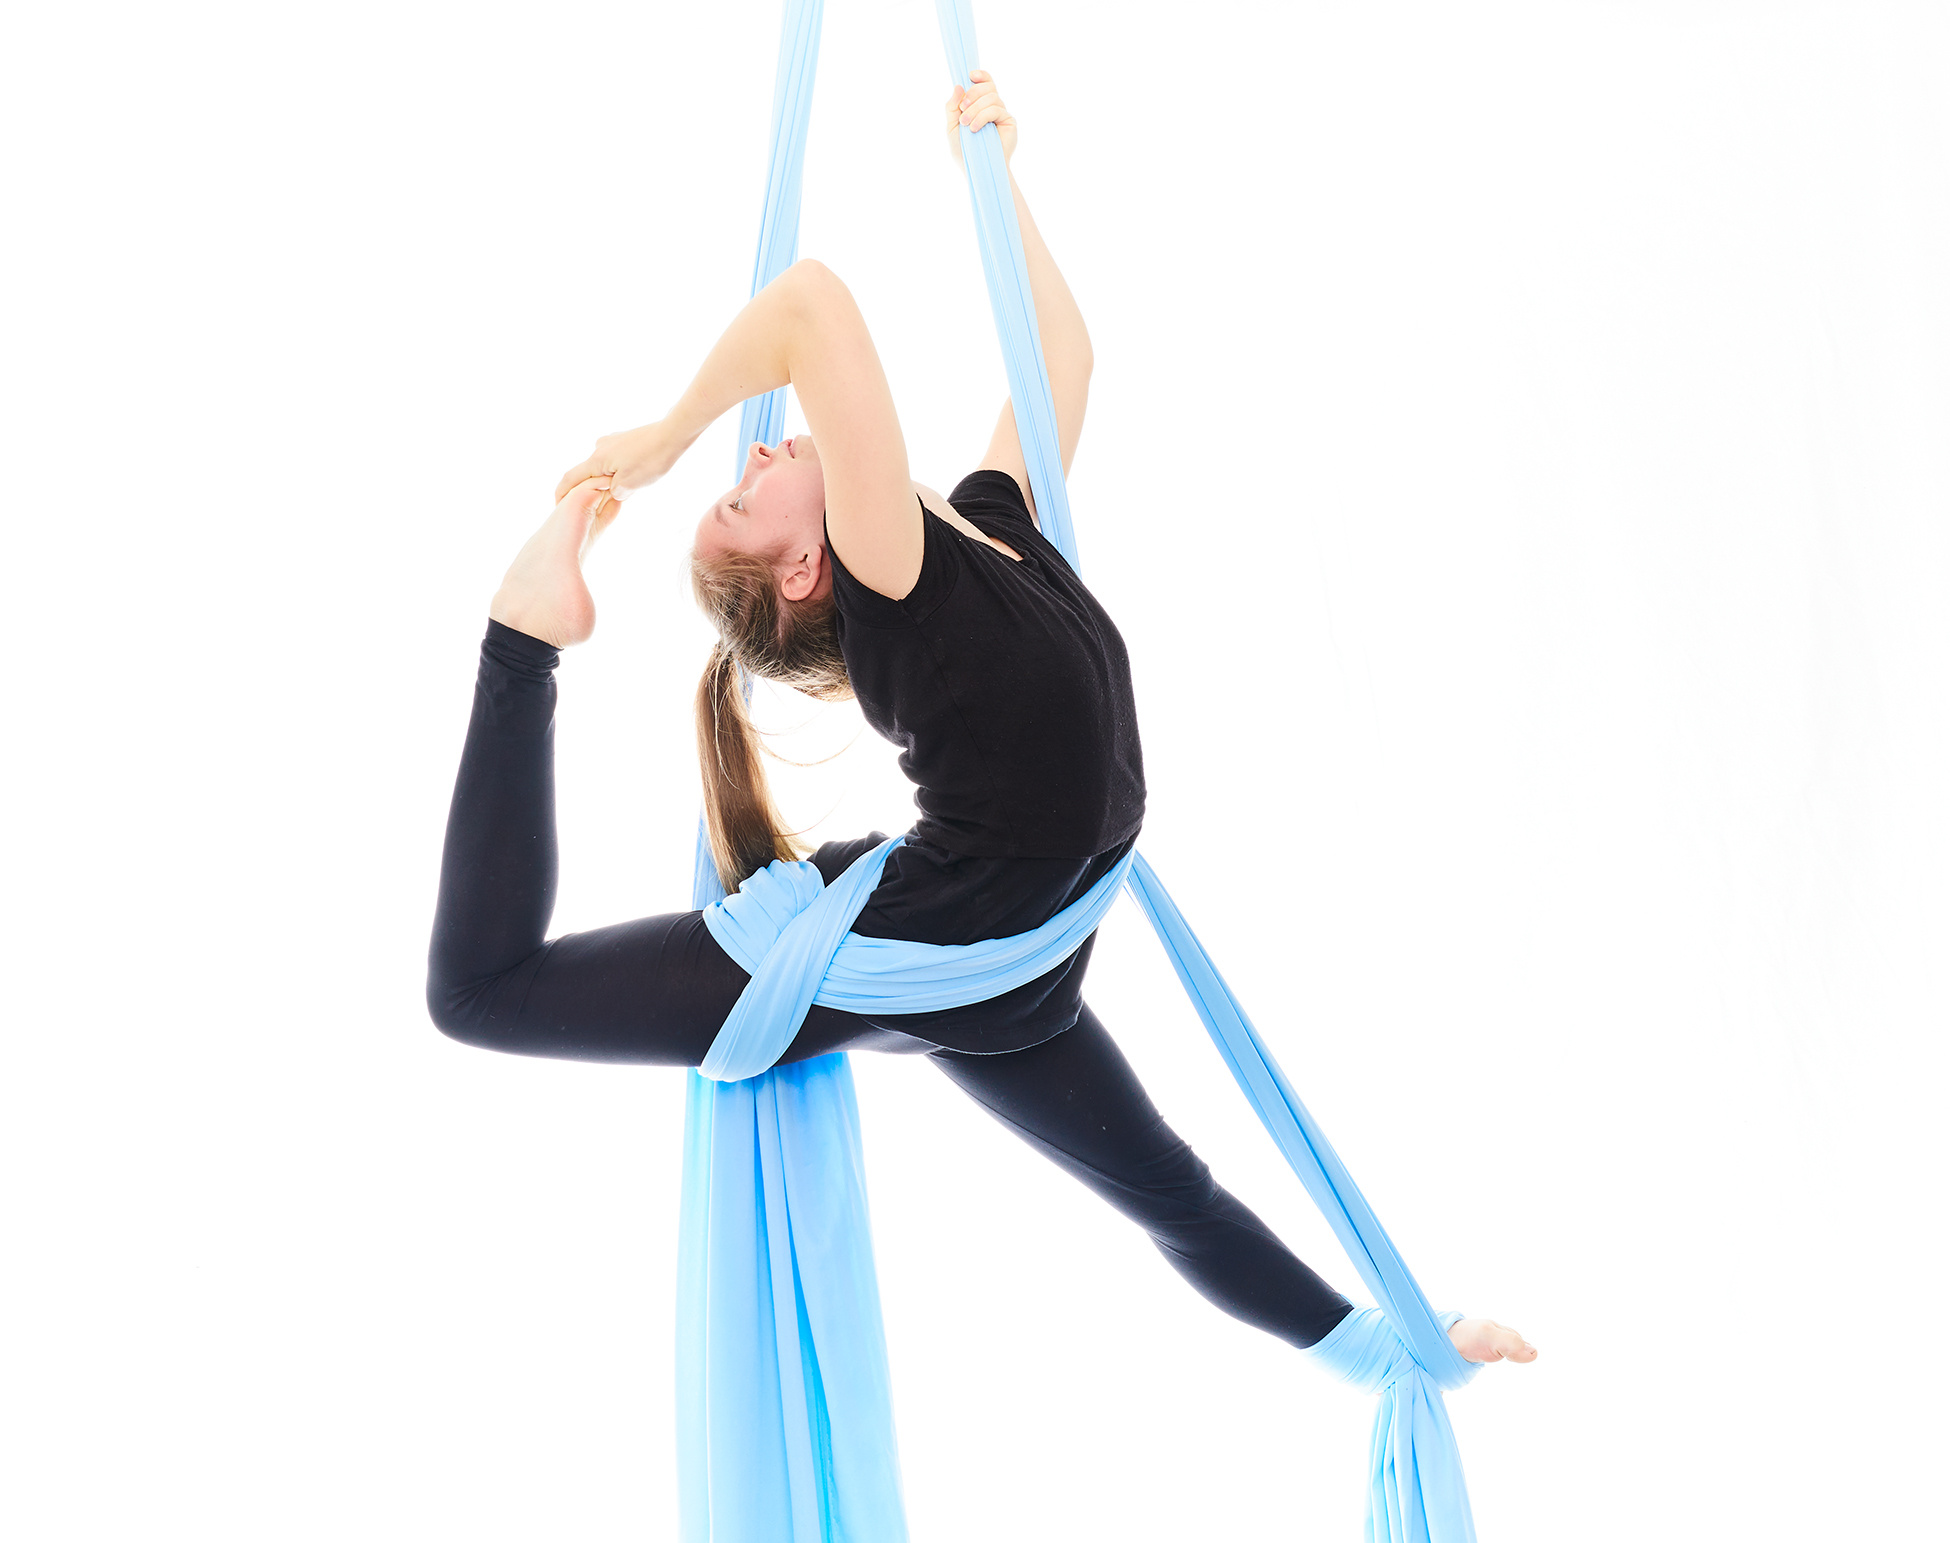 Aerial Silks: A gymnast performs a stretch while hanging from a fabric. 1950x1550 HD Wallpaper.